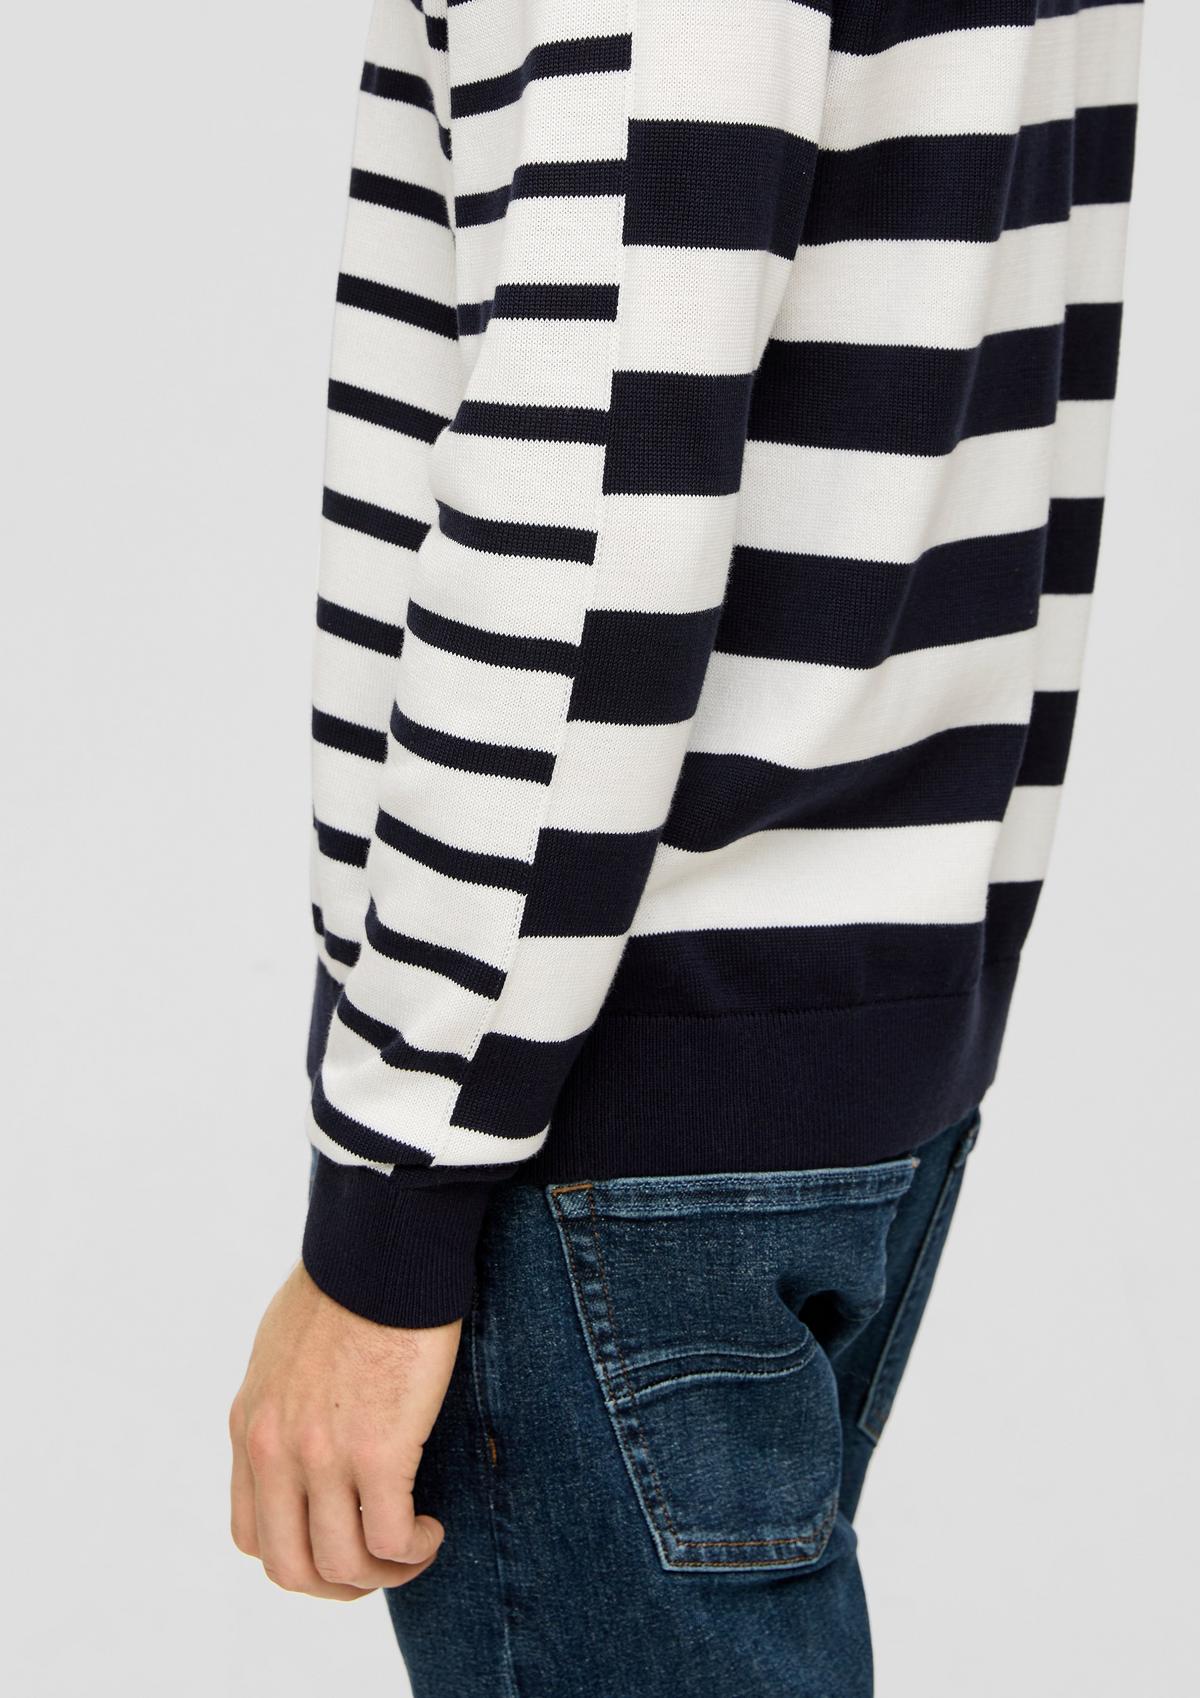 s.Oliver Knit jumper with a crew neck